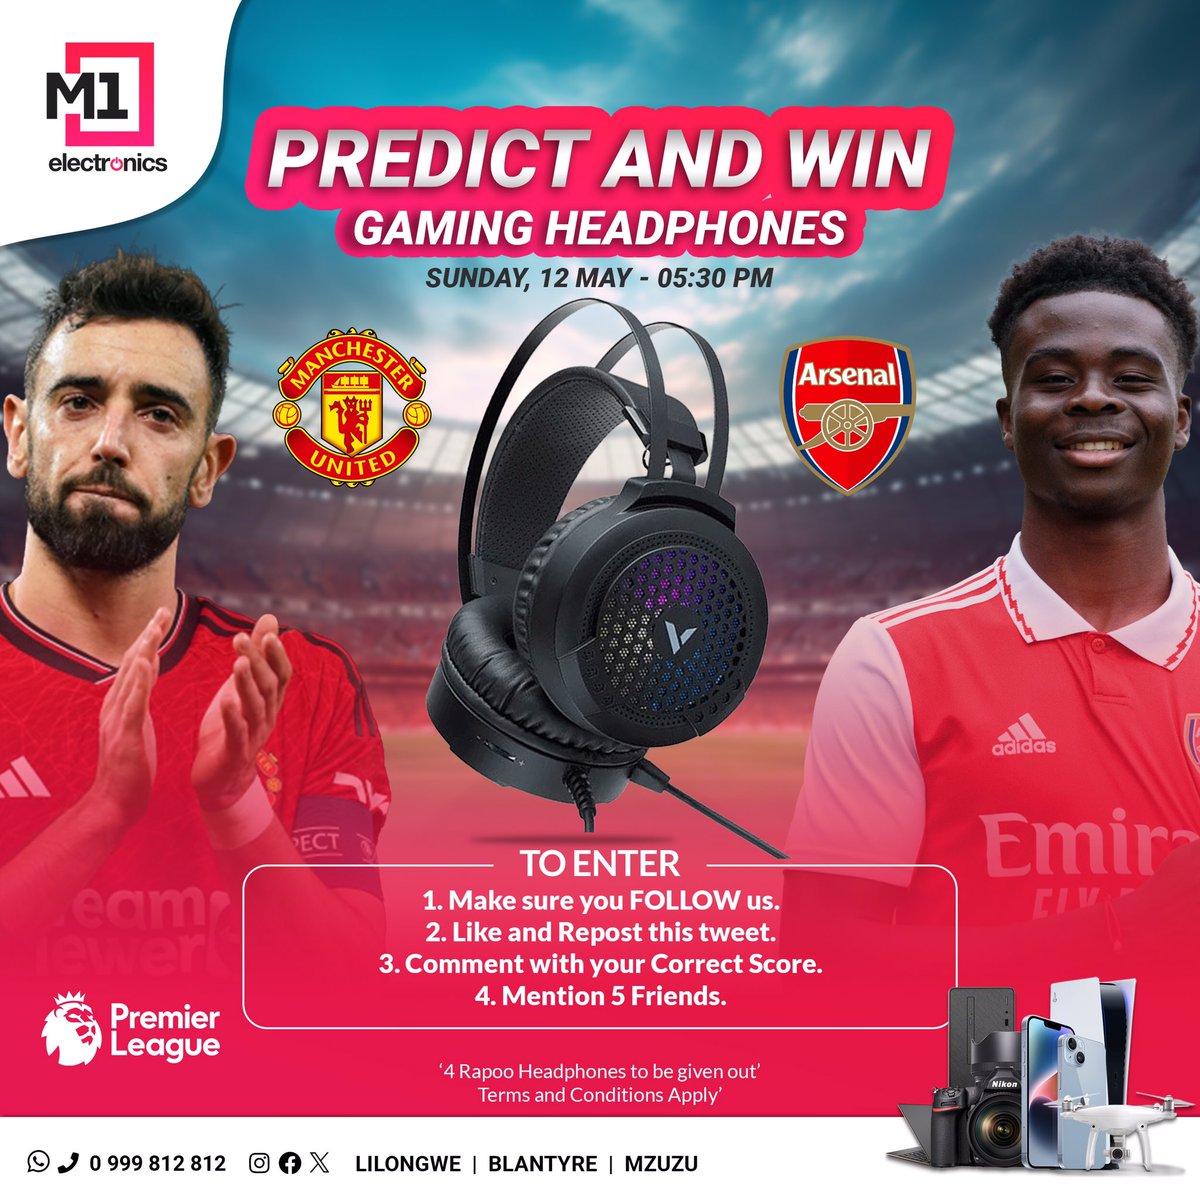 It's the battle of the titans! Predict the score for Man U vs. Arsenal game and stand a chance to win amazing prize. Don't miss out on the action! #Rapoogamingheadphones #M1electronics #ManUvsArsenal #PredictAndWin #PremierLeague #BattleOfTheTitans